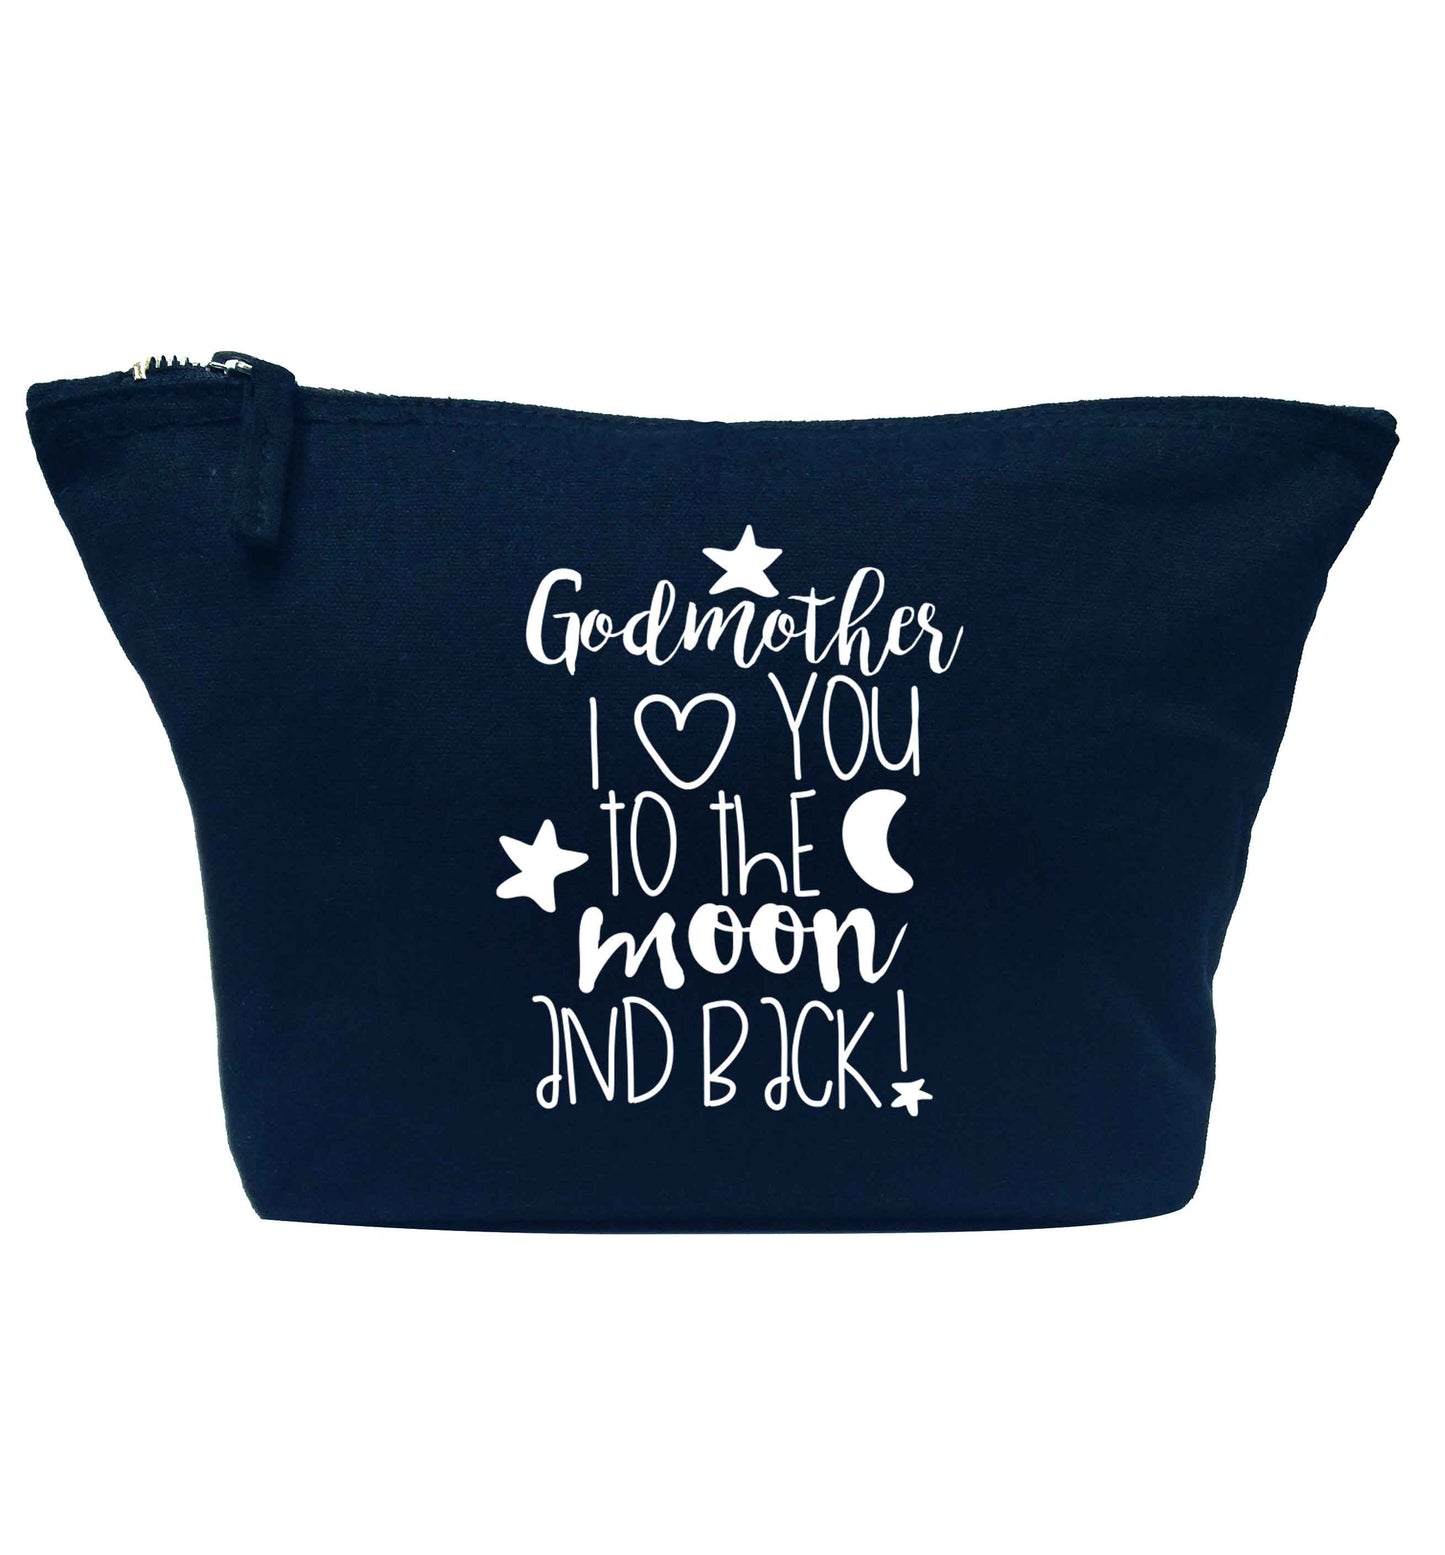 Godmother I love you to the moon and back navy makeup bag